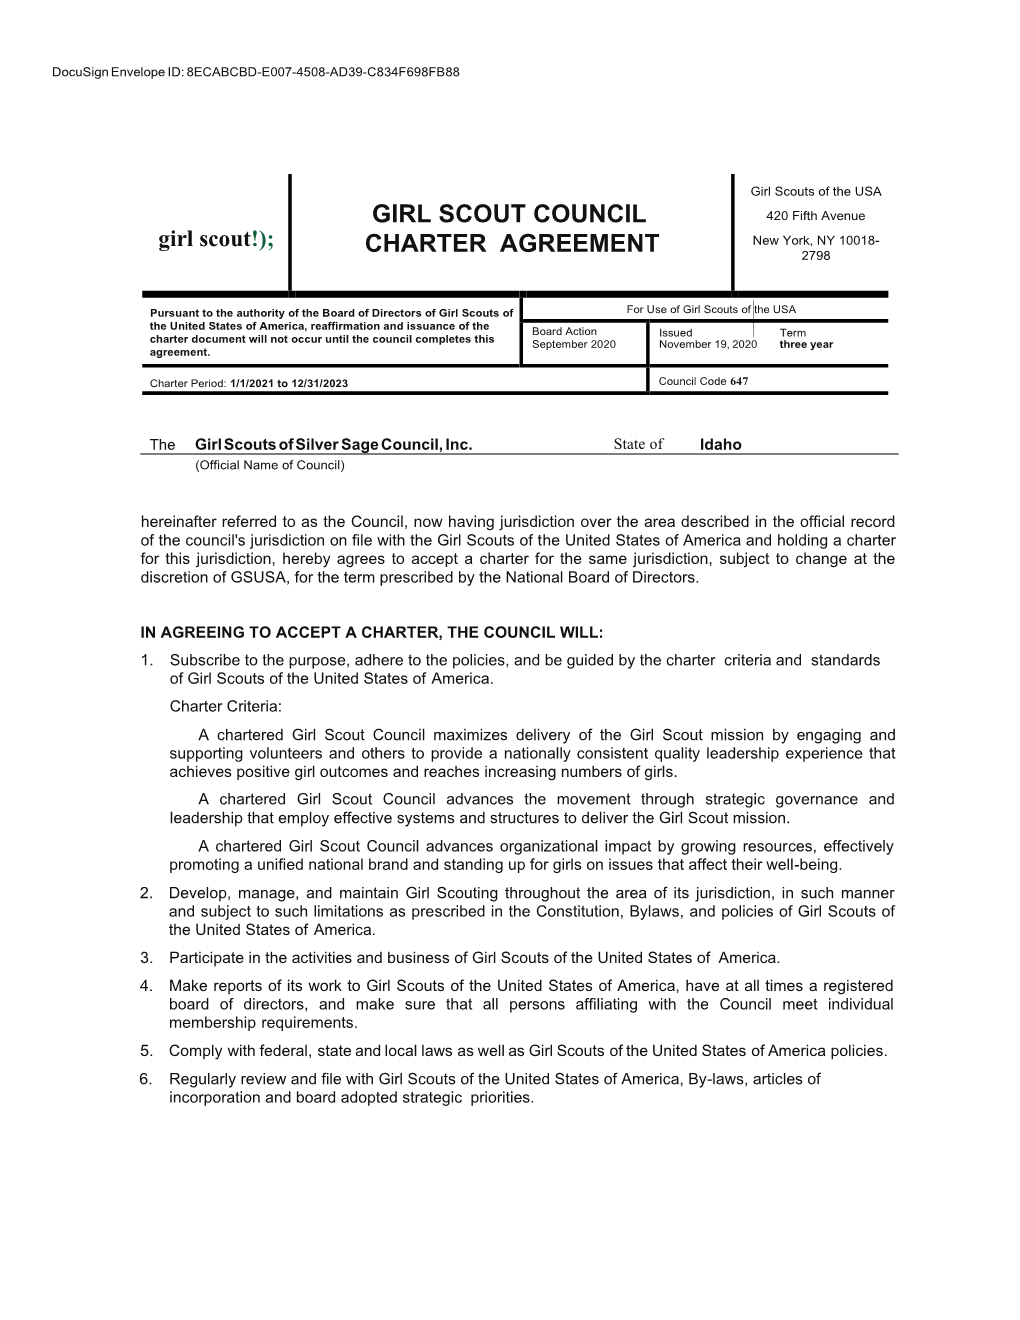 Girl Scout Council Charter Agreement